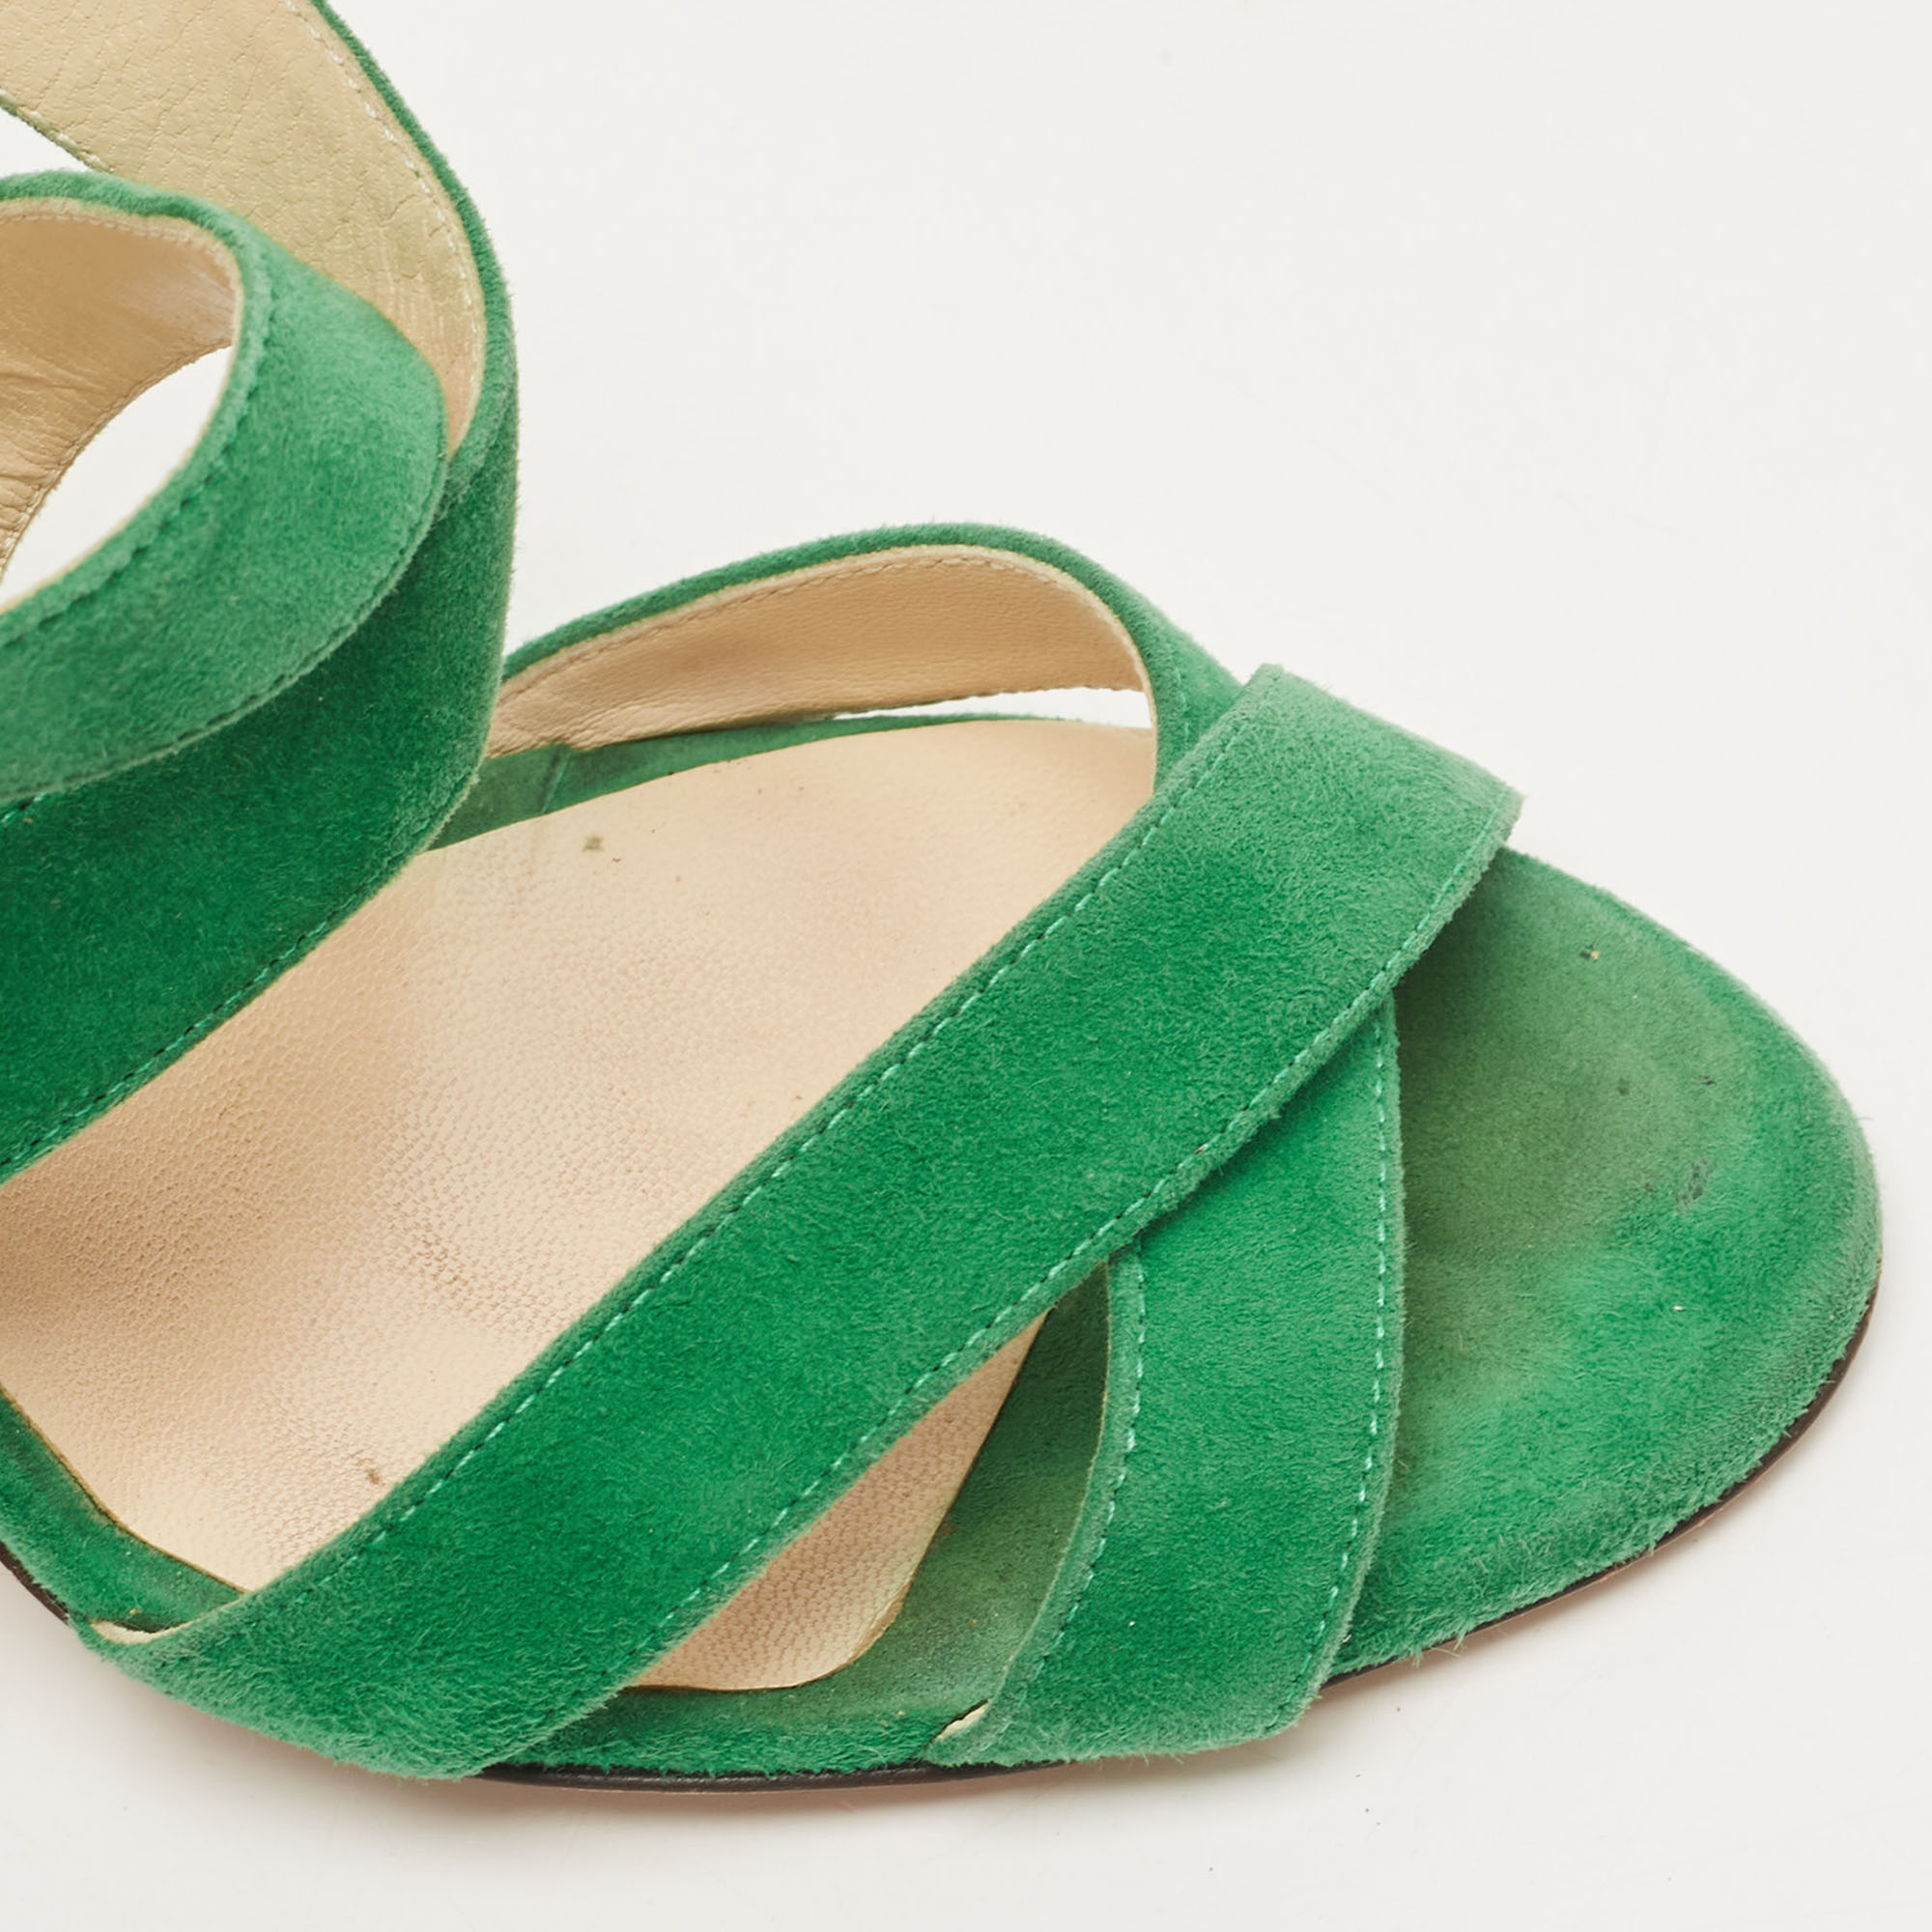 Jimmy Choo Green Suede Ankle Strap Sandals Size 36